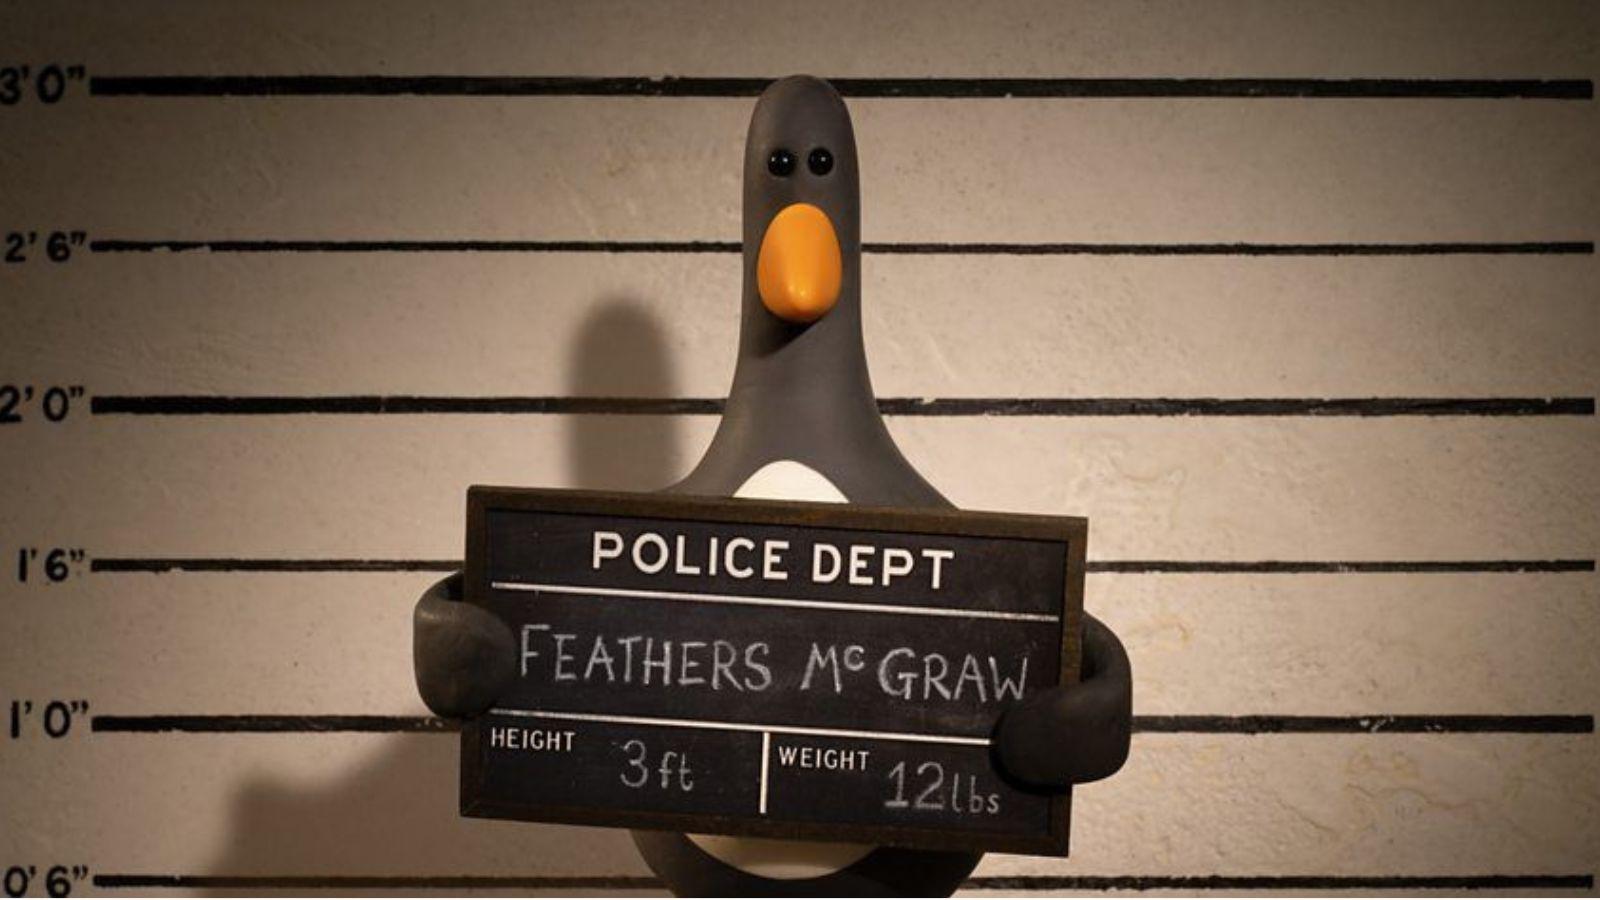 Feathers McGraw in the new Wallace & Gromit movie